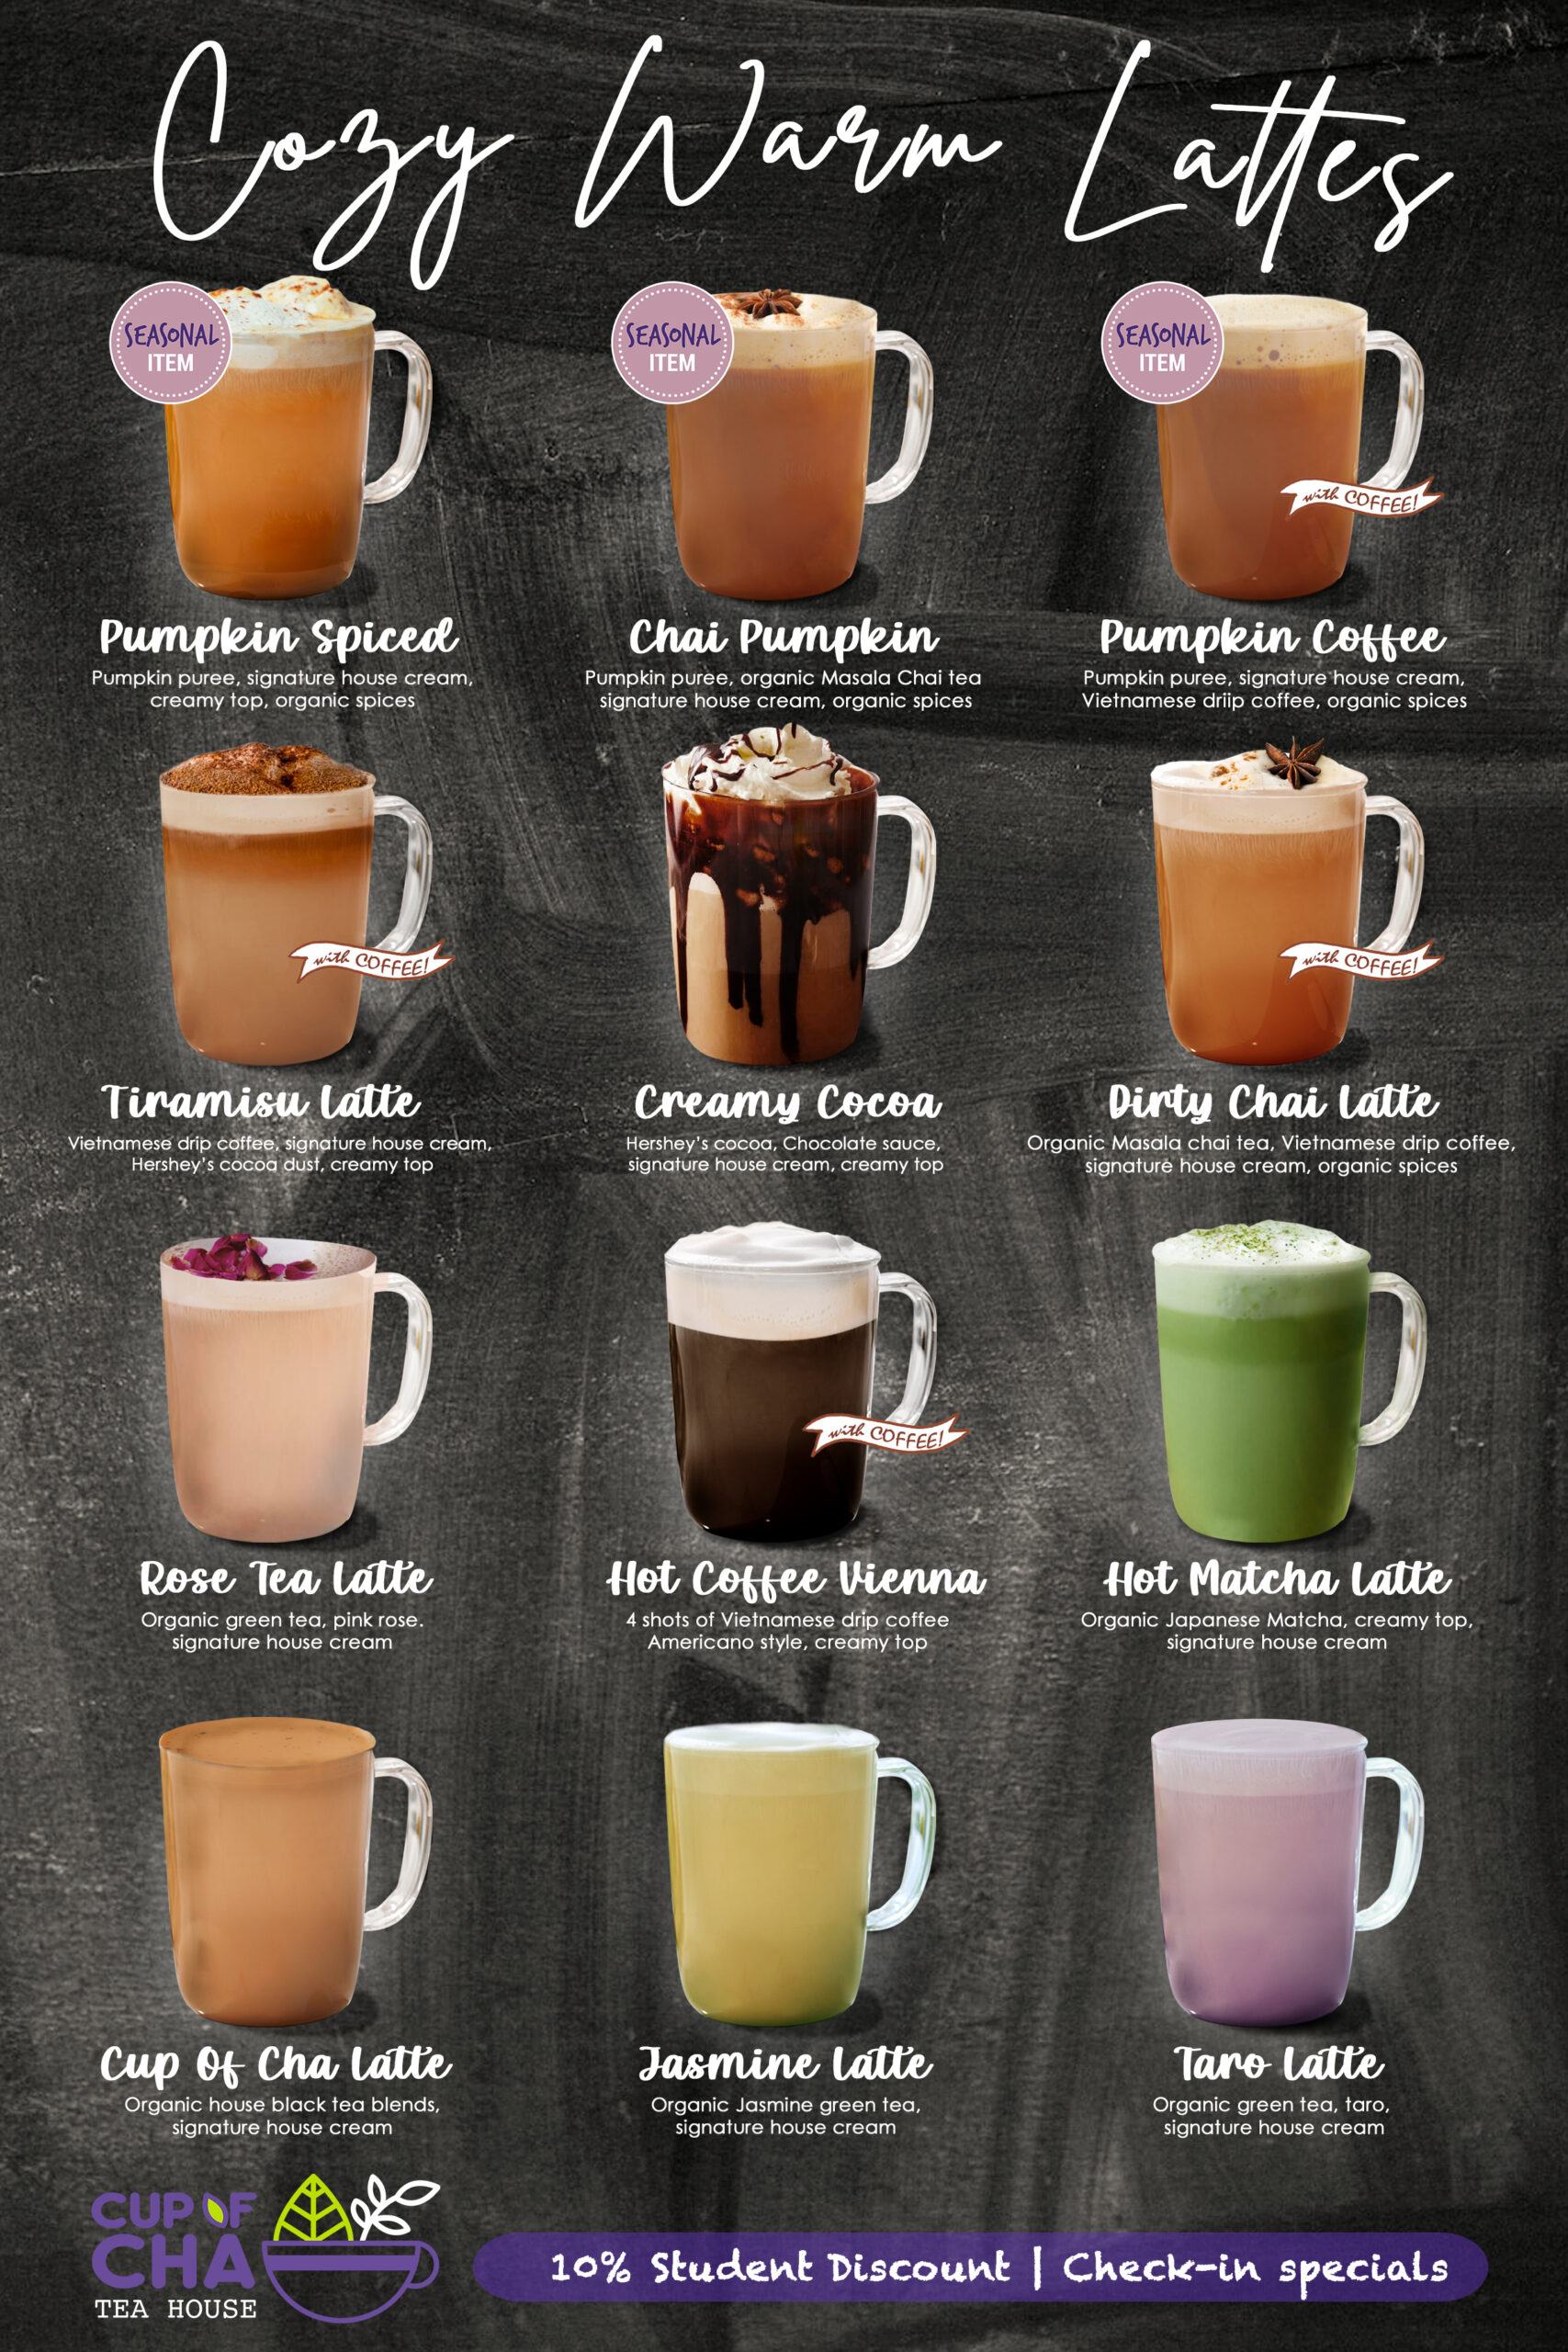 Hot milk latte menu showcasing a variety of hot drinks such as chai latte, rose latte, taro latte, matcha latte. Please call us if you need assistance.